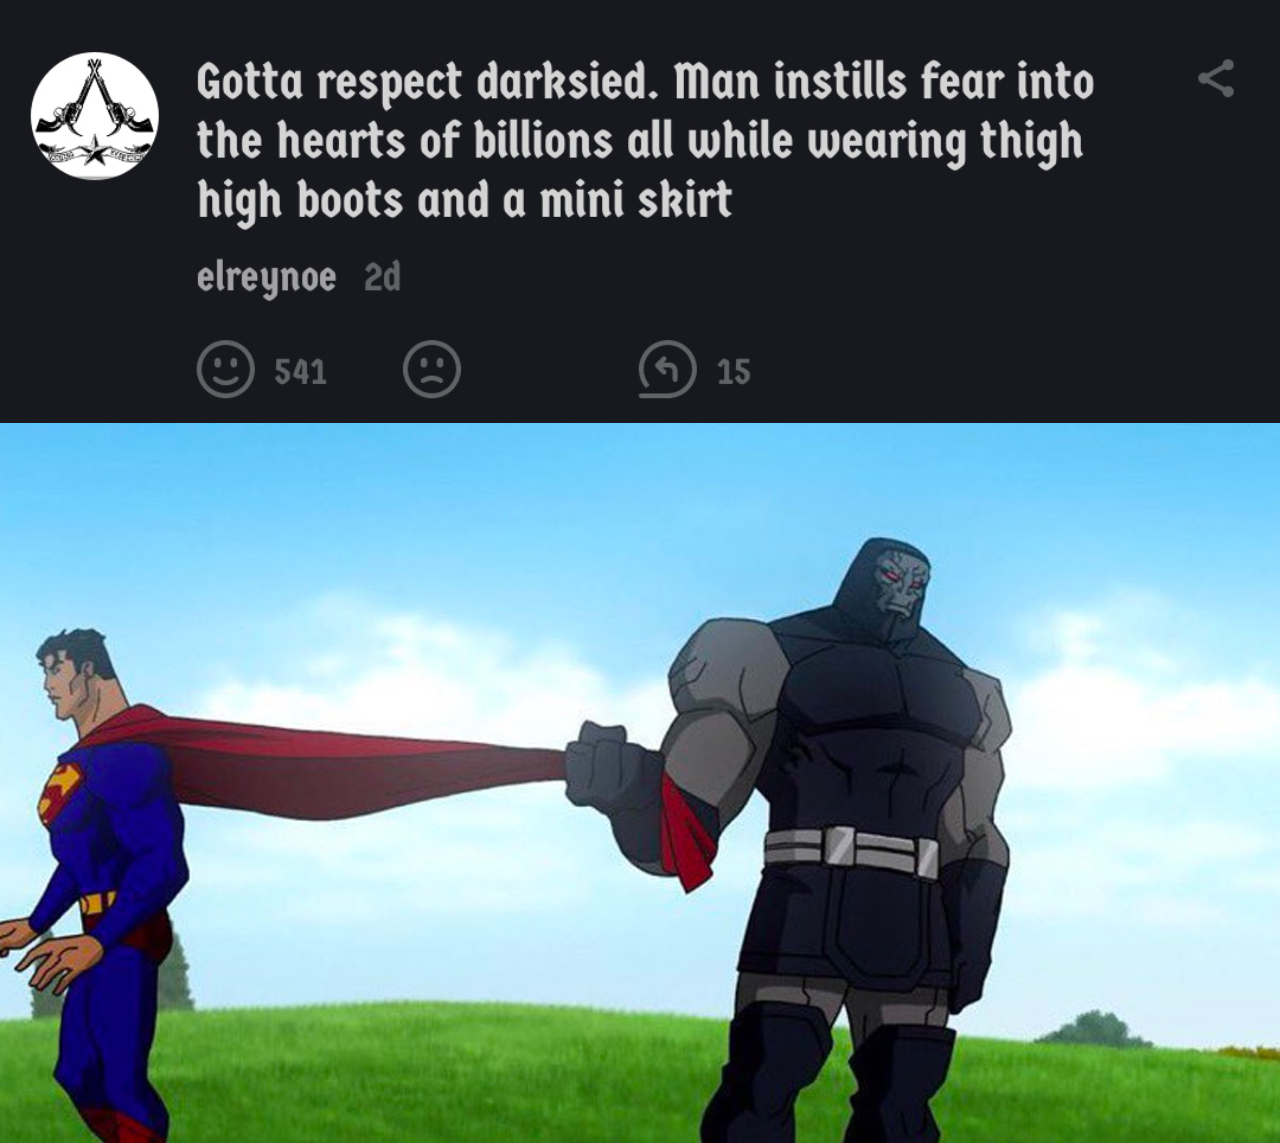 funny memes - meme superman cape - Gotta respect darksied. Man instills fear into the hearts of billions all while wearing thigh high boots and a mini skirt elreynoe 2d 541 15